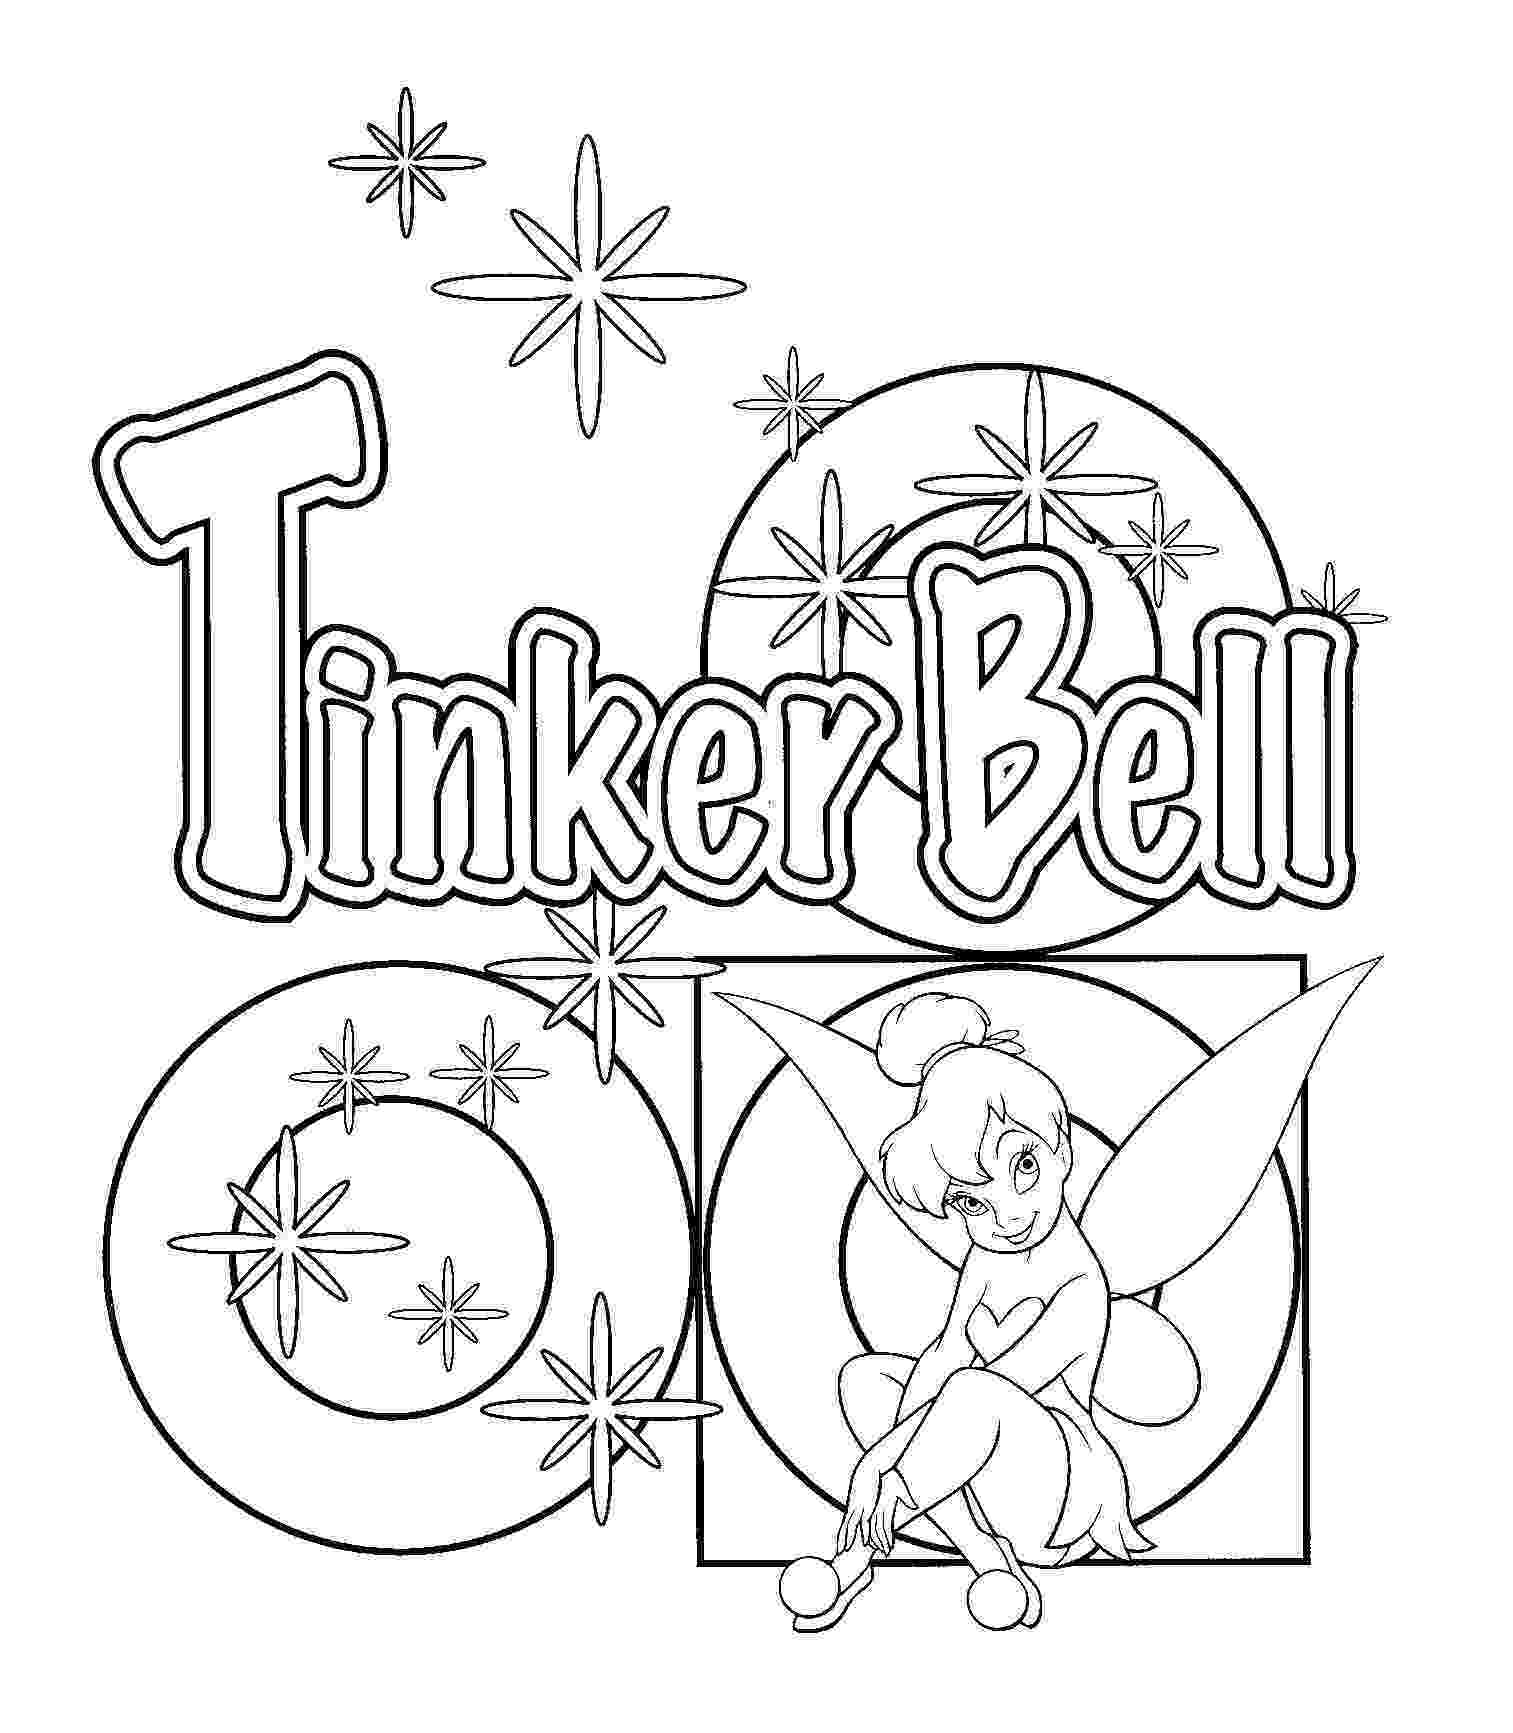 tinkerbell coloring book games tinkerbell coloring pages tinkerbell coloring pages games coloring book tinkerbell 